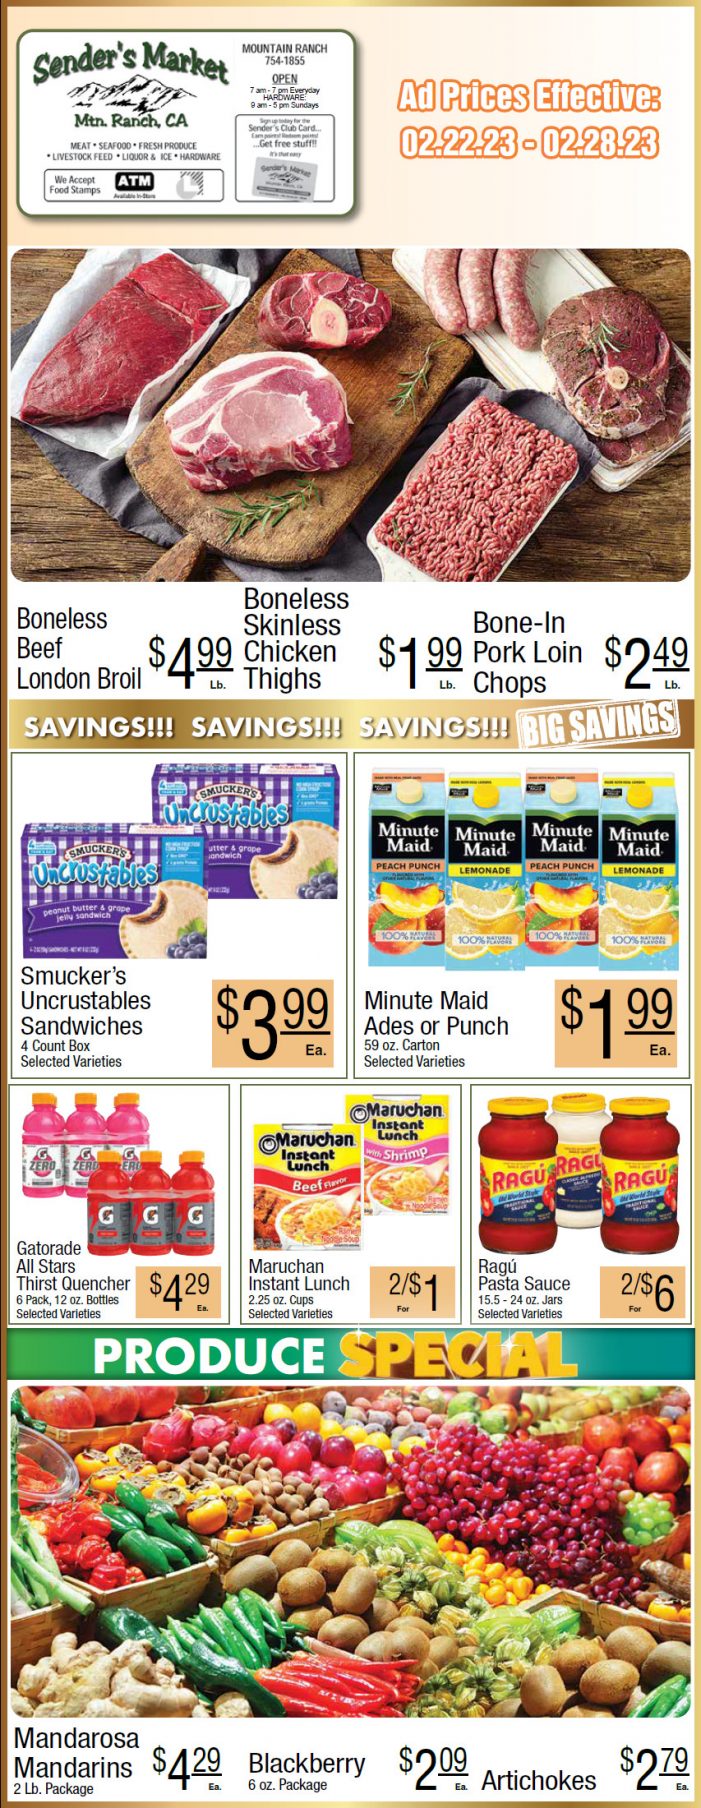 Sender’s Market Weekly Ad & Grocery Specials Through February 28th! Shop Local & Save!!